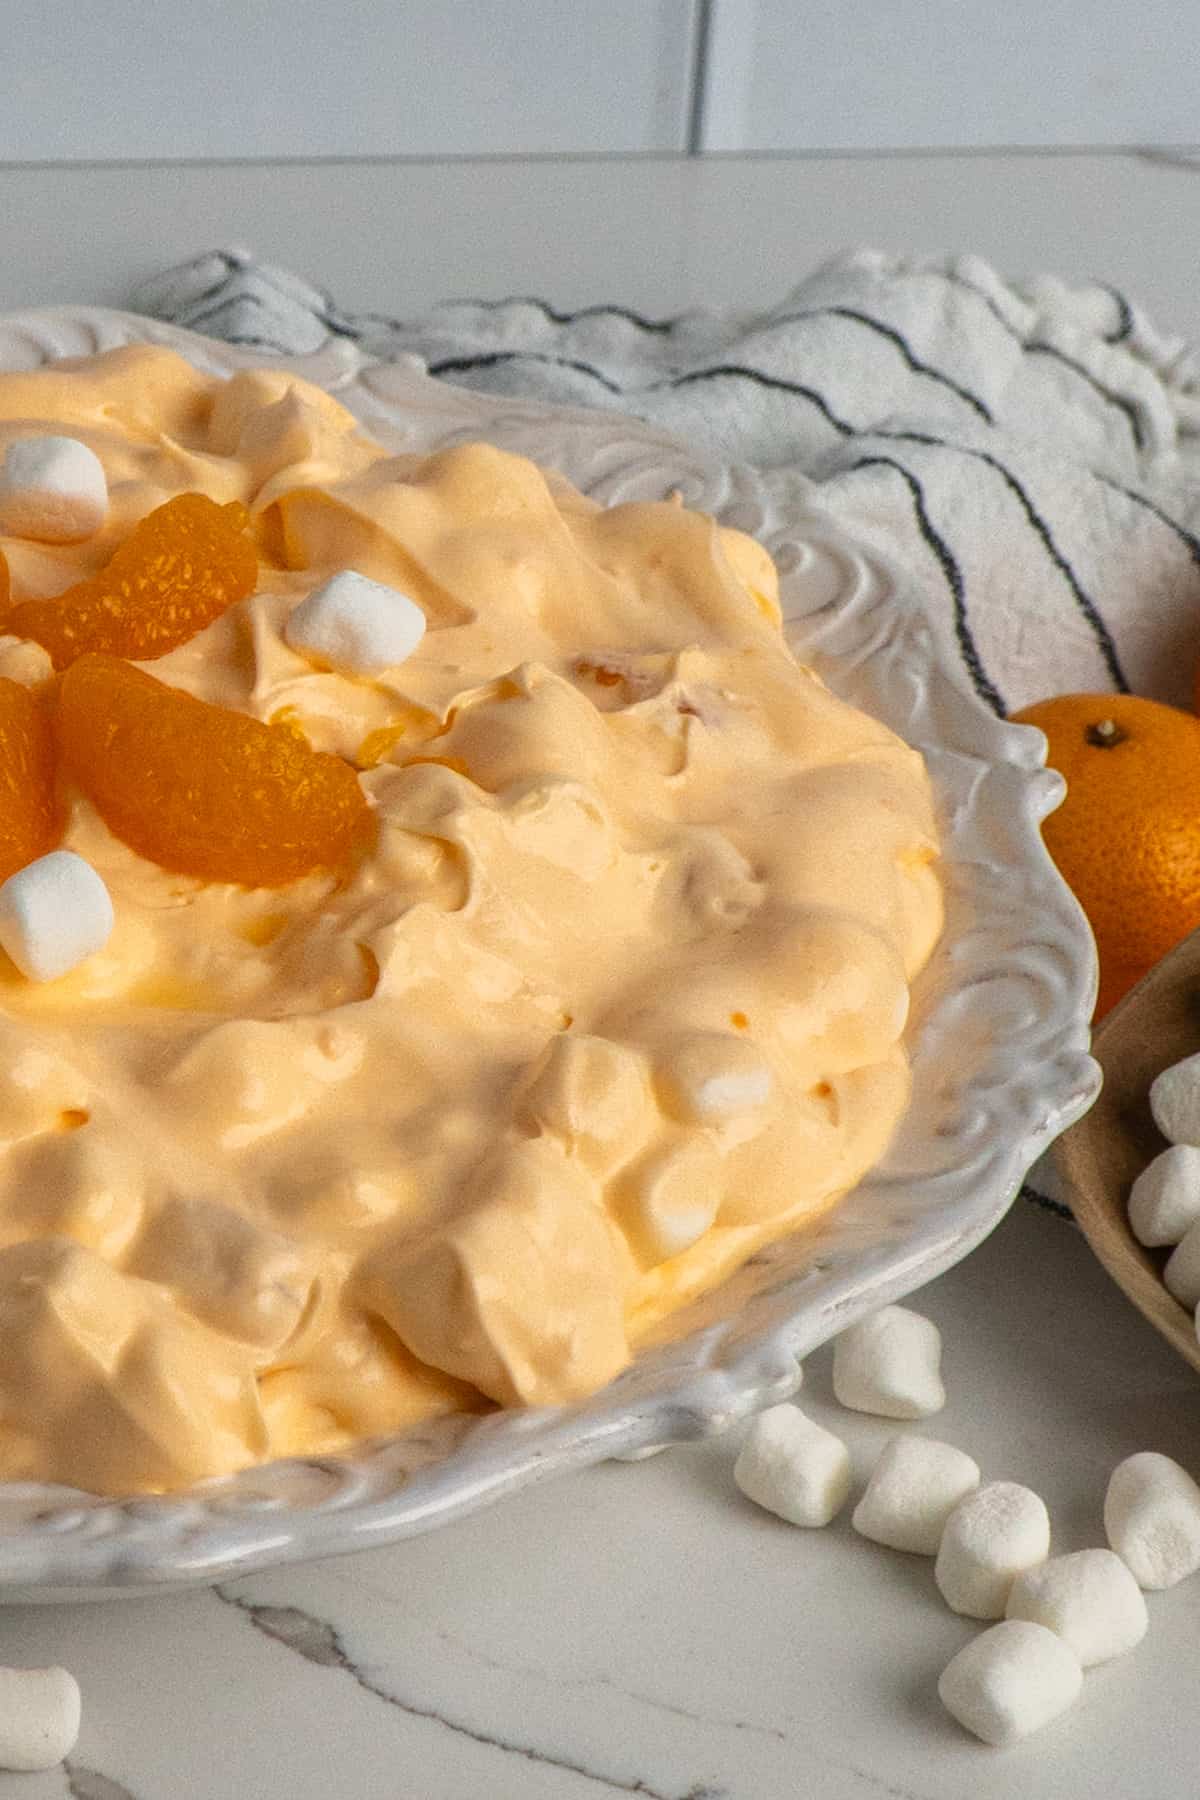 Orange fluff salad topped with mandarin oranges and marshmallows.